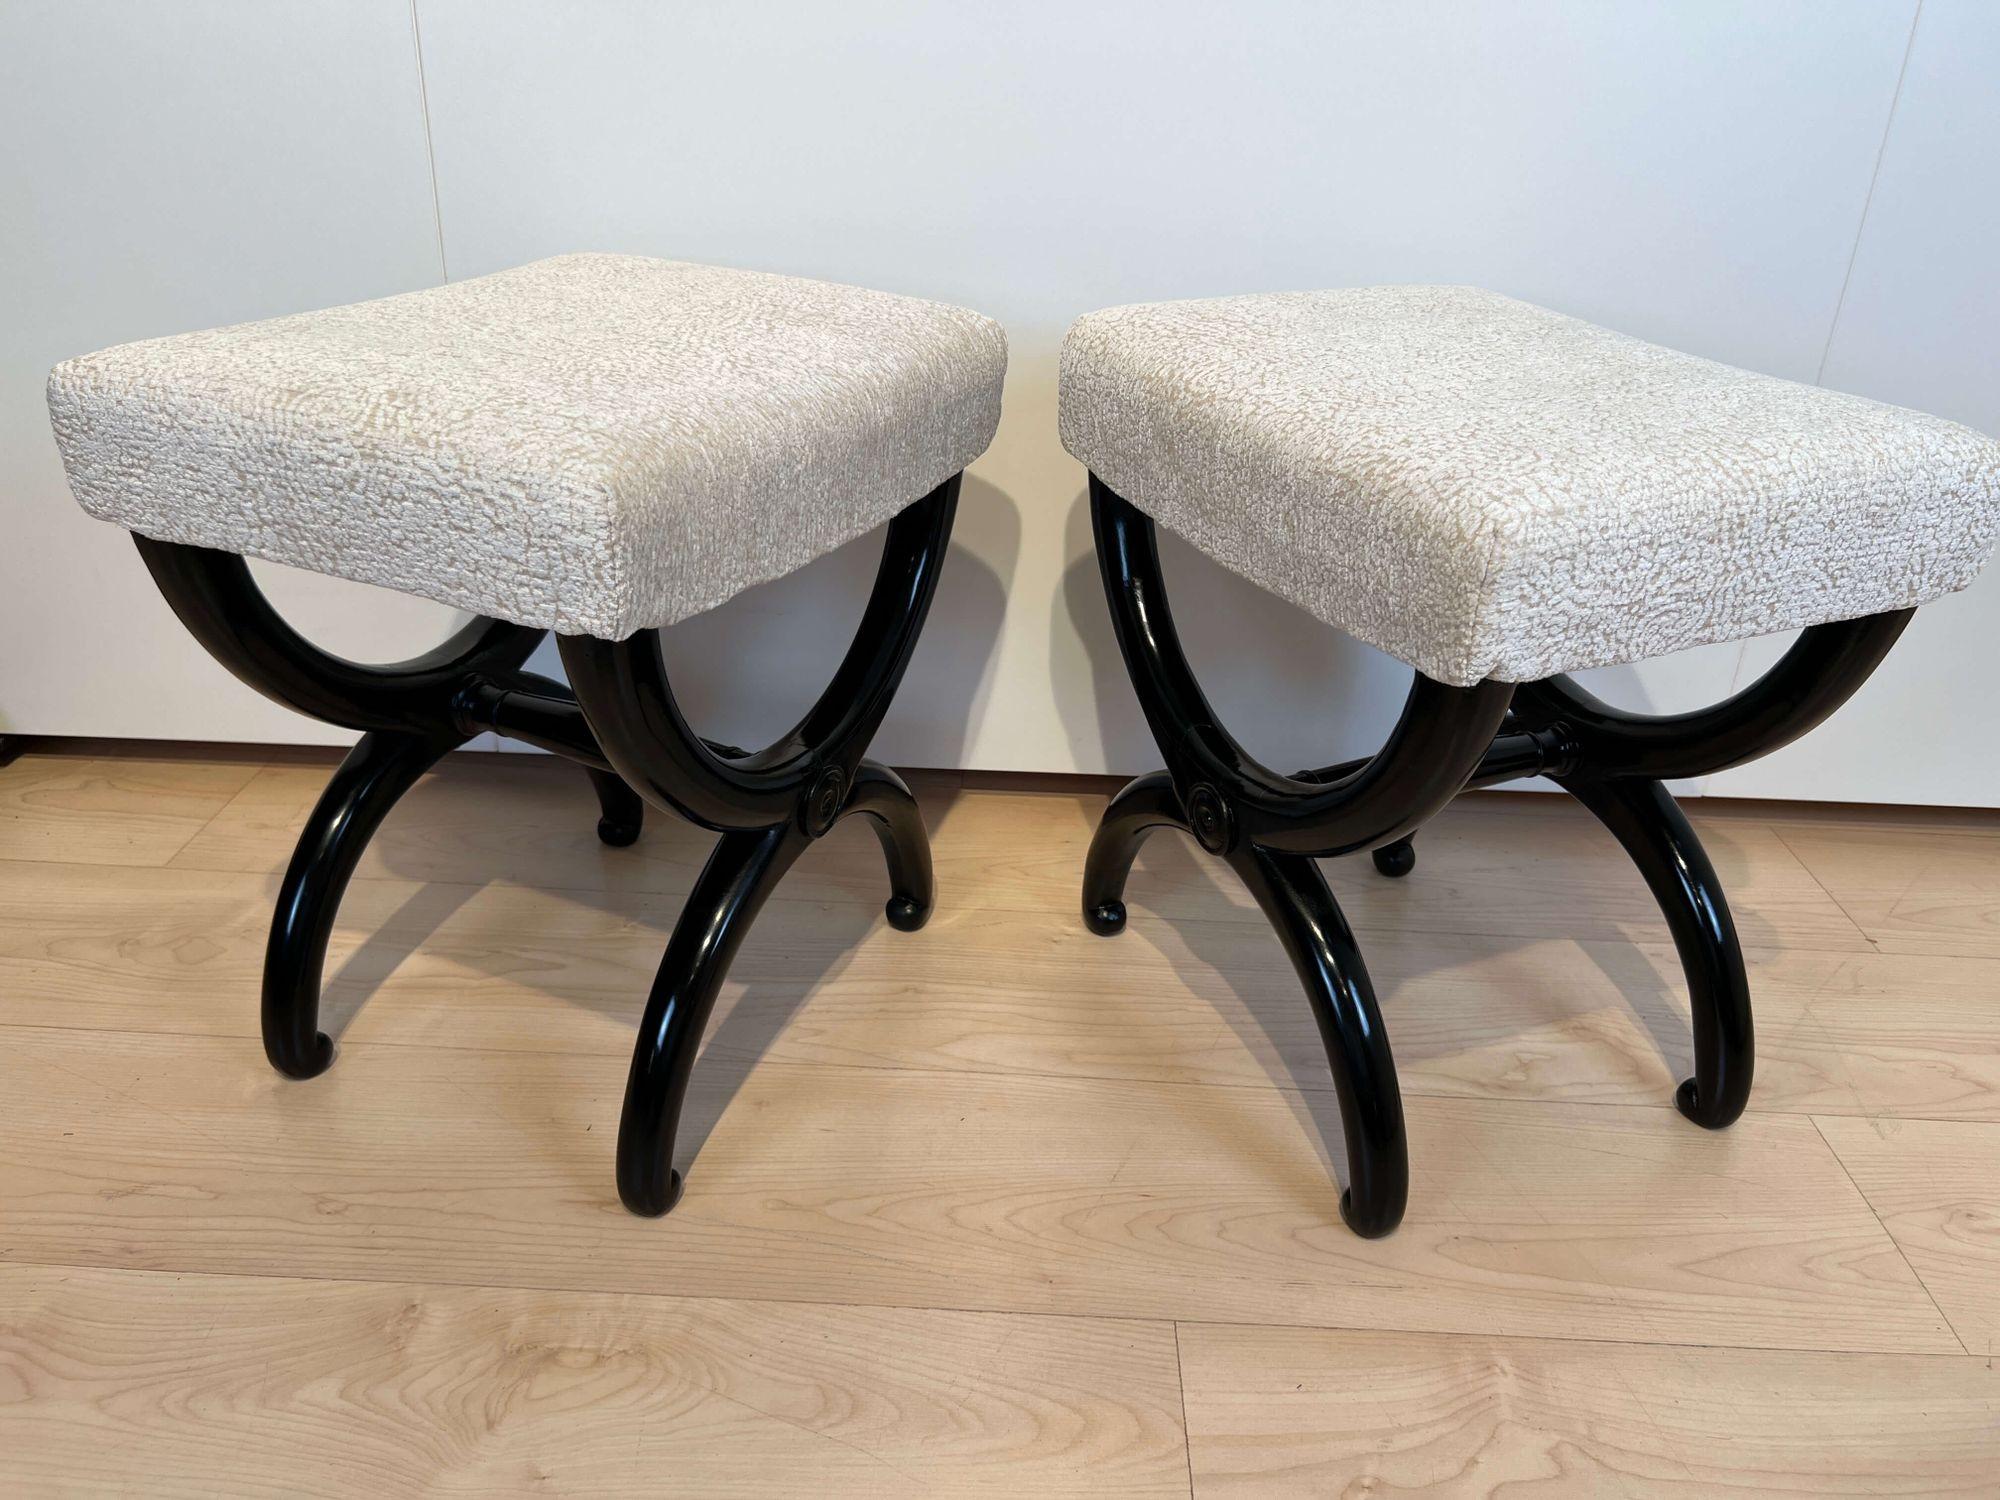 Pair of Antique Stools, Ebonized Beech Wood, Creme Fabric, France circa 1820 For Sale 2